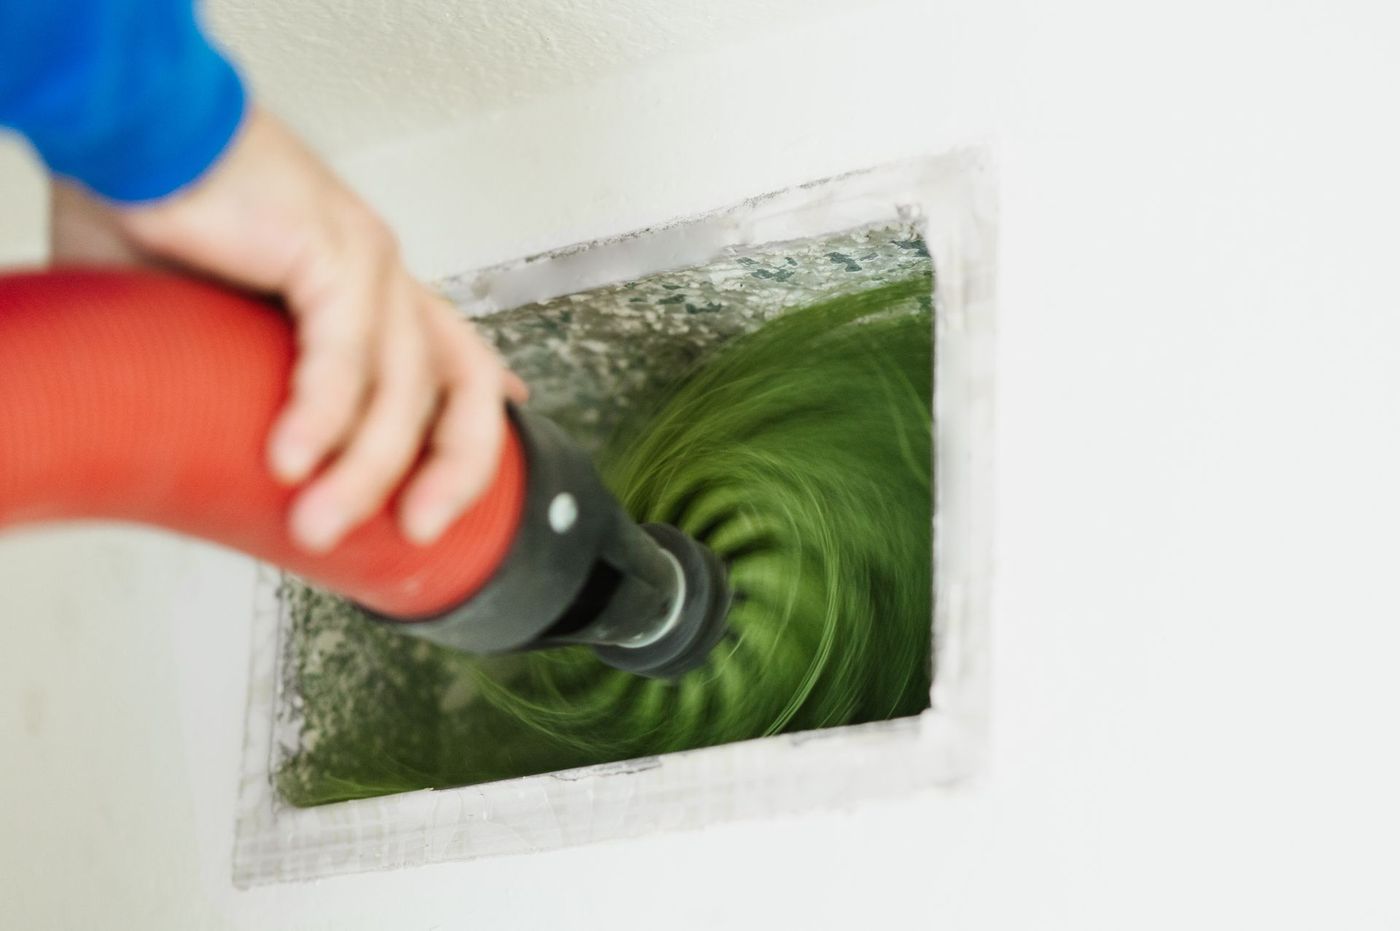 Orange county air duct cleaning service